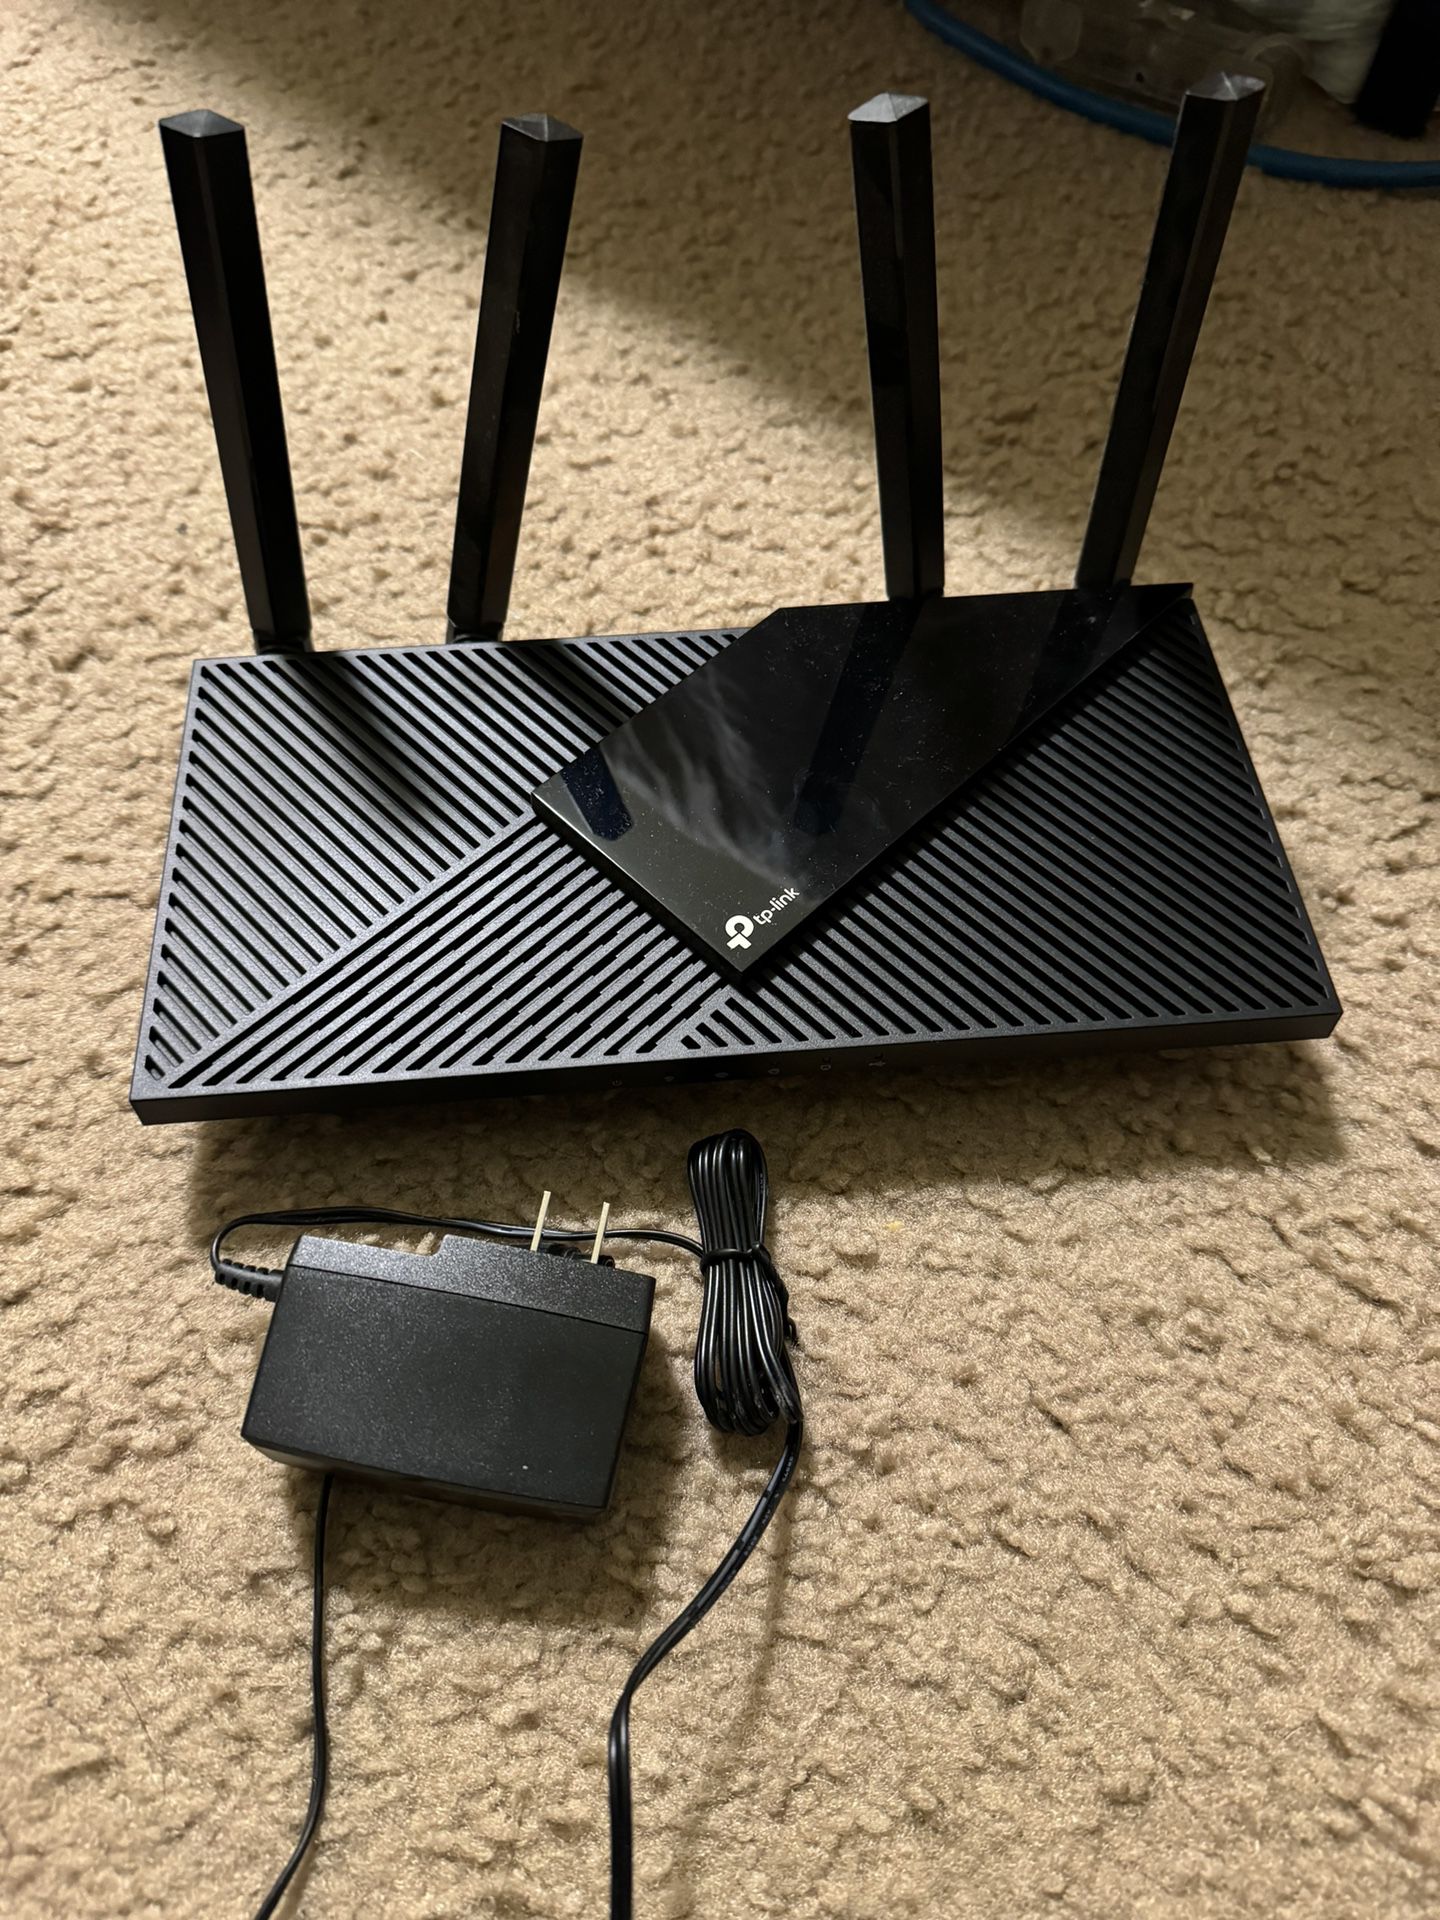 TP Link Wi-Fi 6 Router